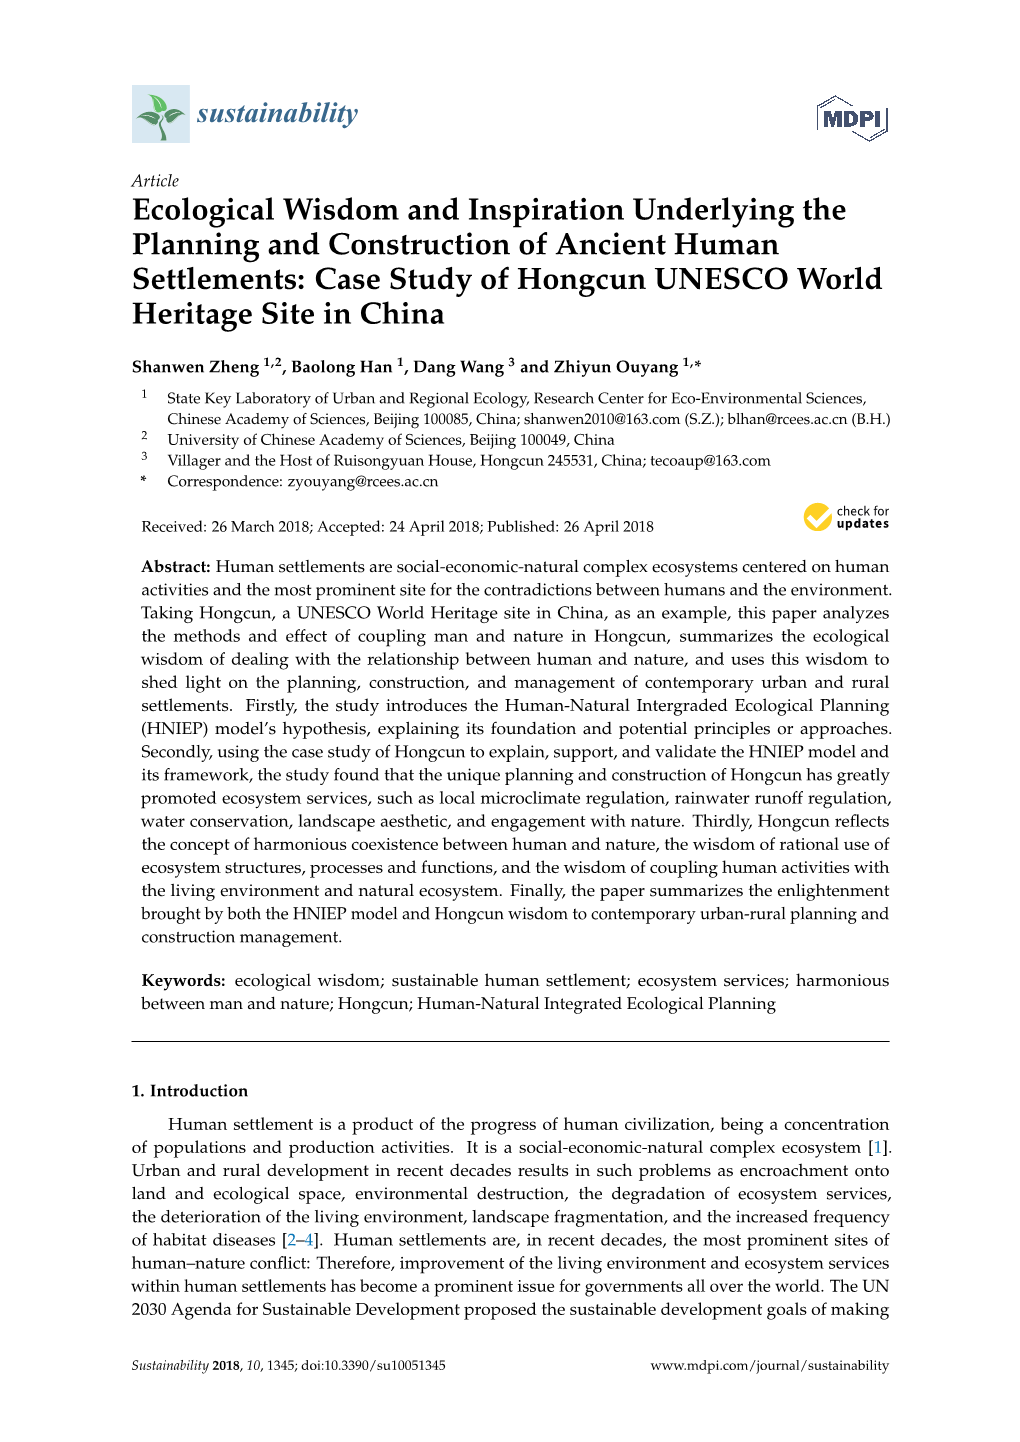 Ecological Wisdom and Inspiration Underlying the Planning and Construction of Ancient Human Settlements: Case Study of Hongcun UNESCO World Heritage Site in China